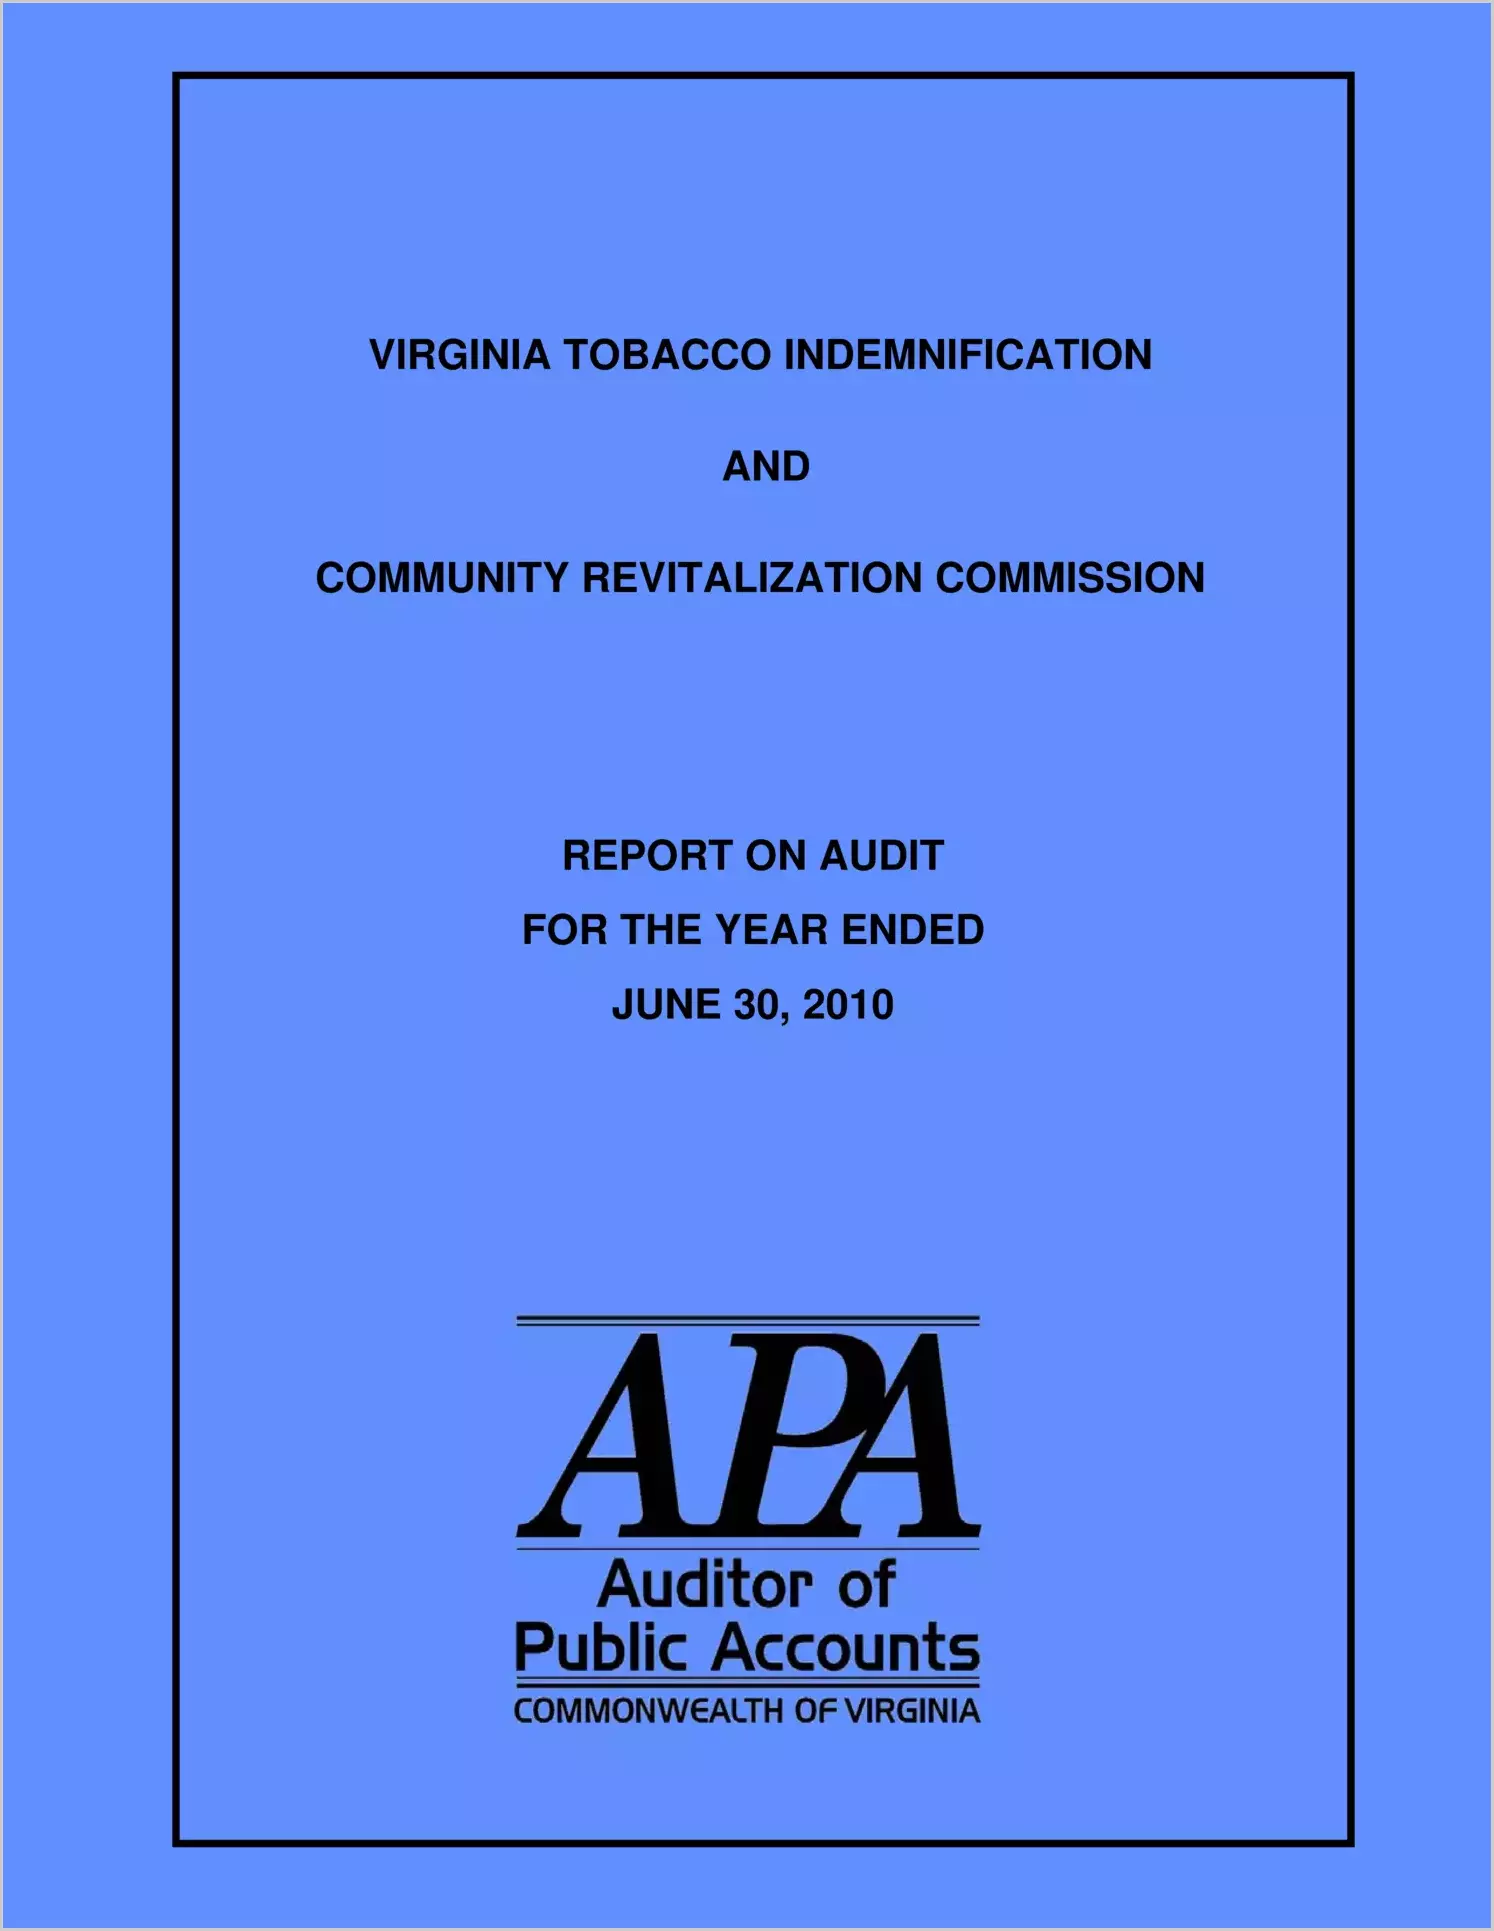 Tobacco Indemnification and Community Revitalization Commission for the year ended June 30, 2010